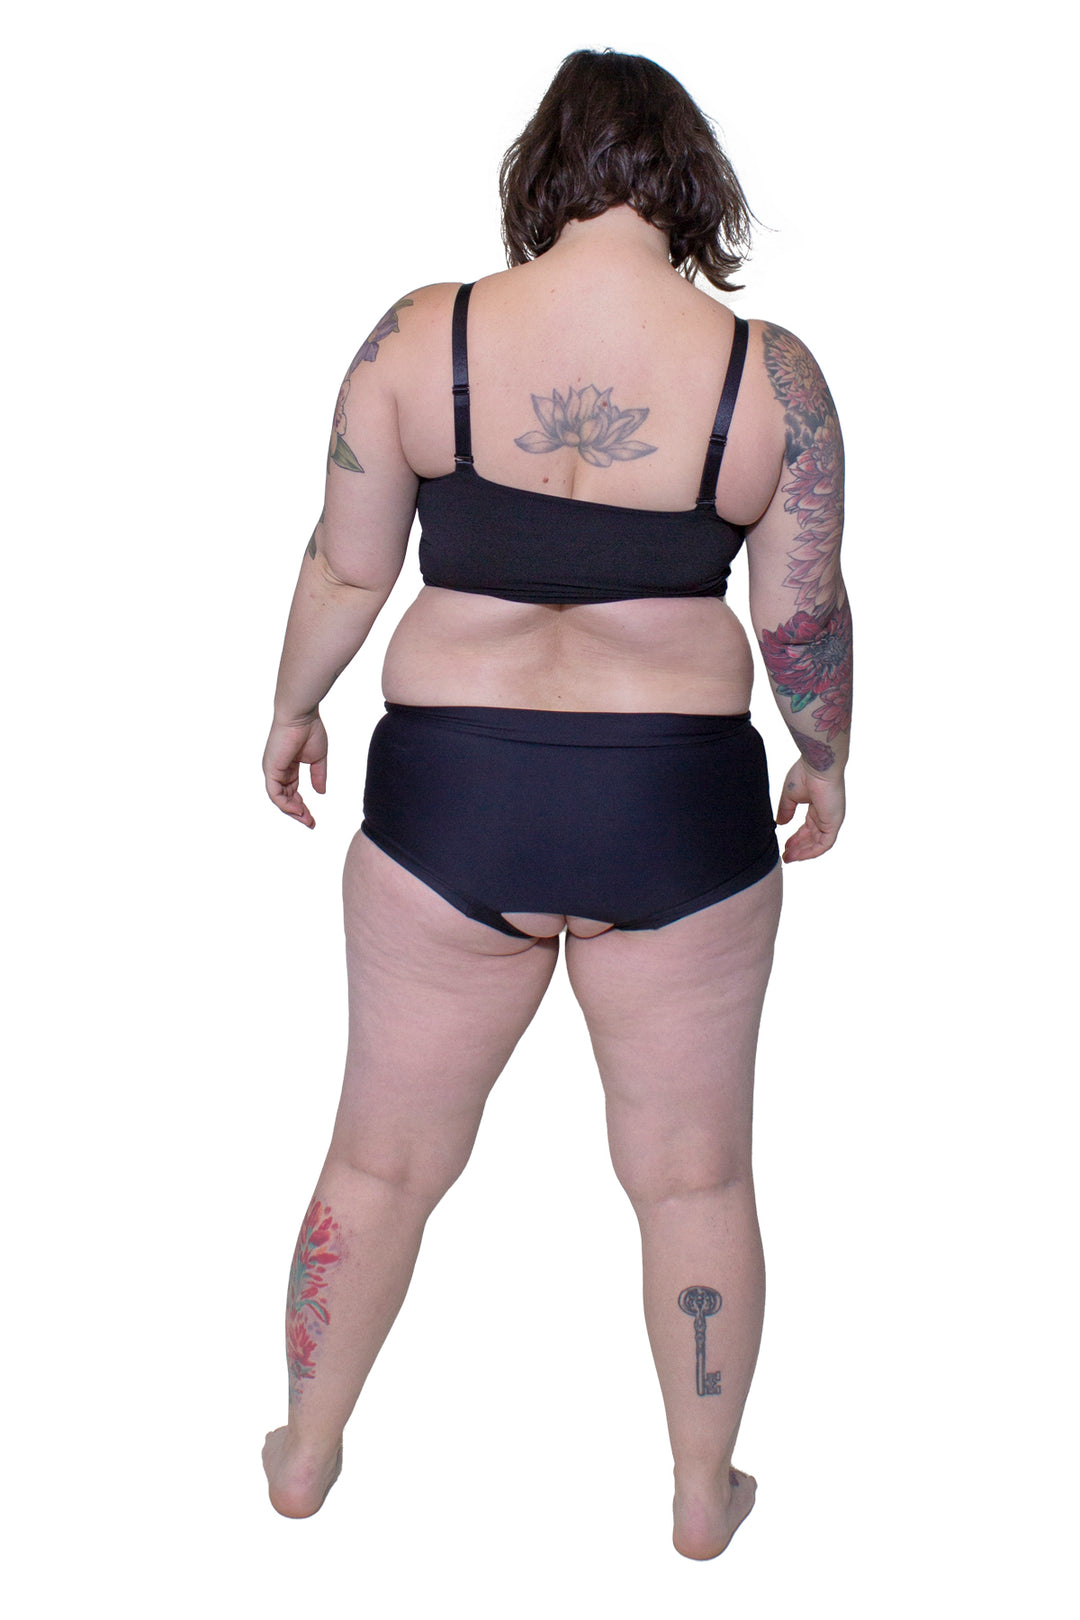 Plus-sized person wearing a black tank top chest binder made from breathable mesh with spaghetti straps, photographed from the back.